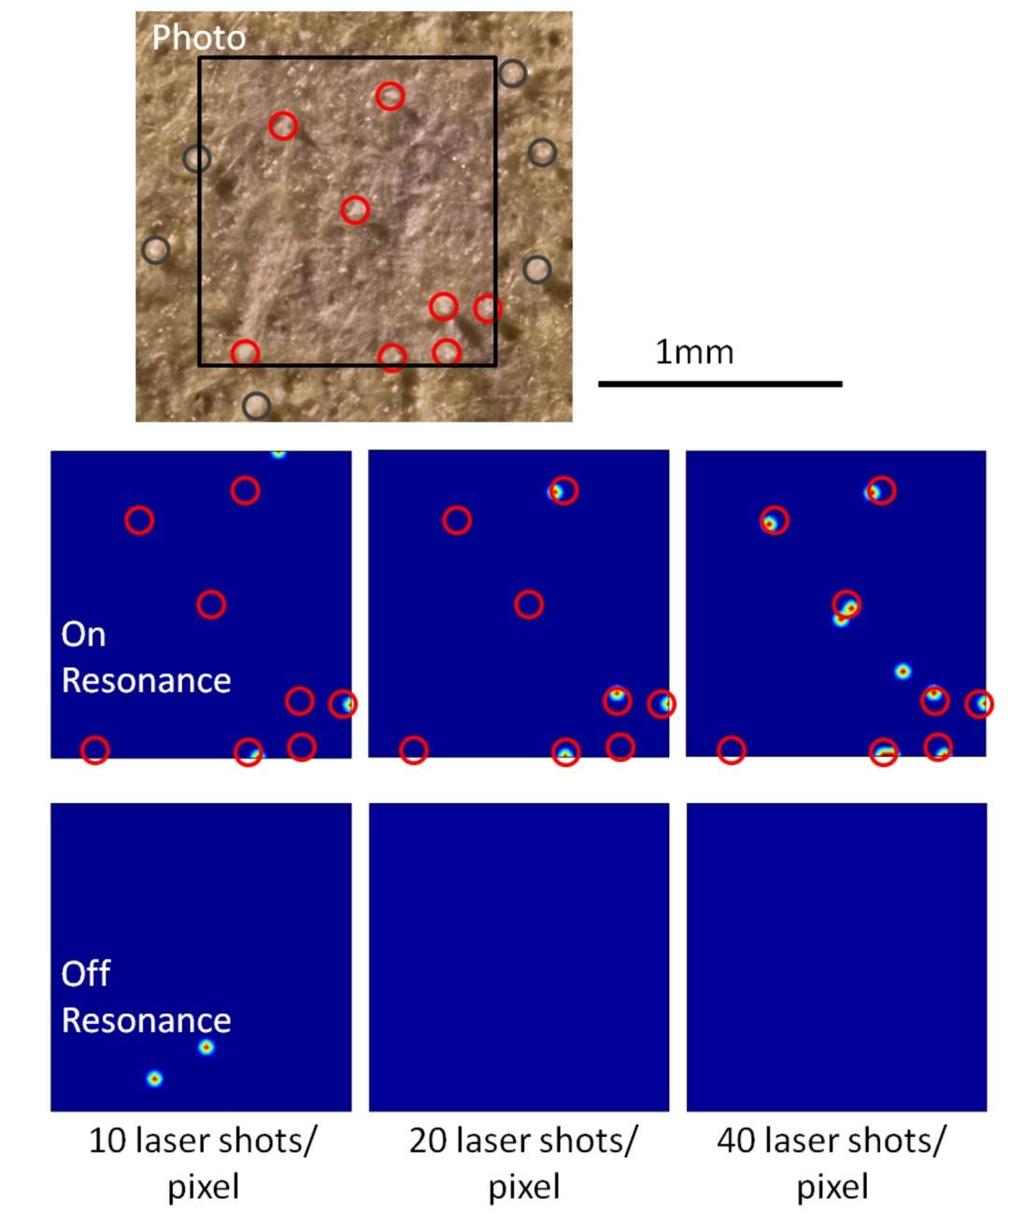 the samples consist of collections of micro-particles or thin residues. Zero background chemical images are obtained from these surfaces with 20 laser shots per pixel. Figure 5.9.